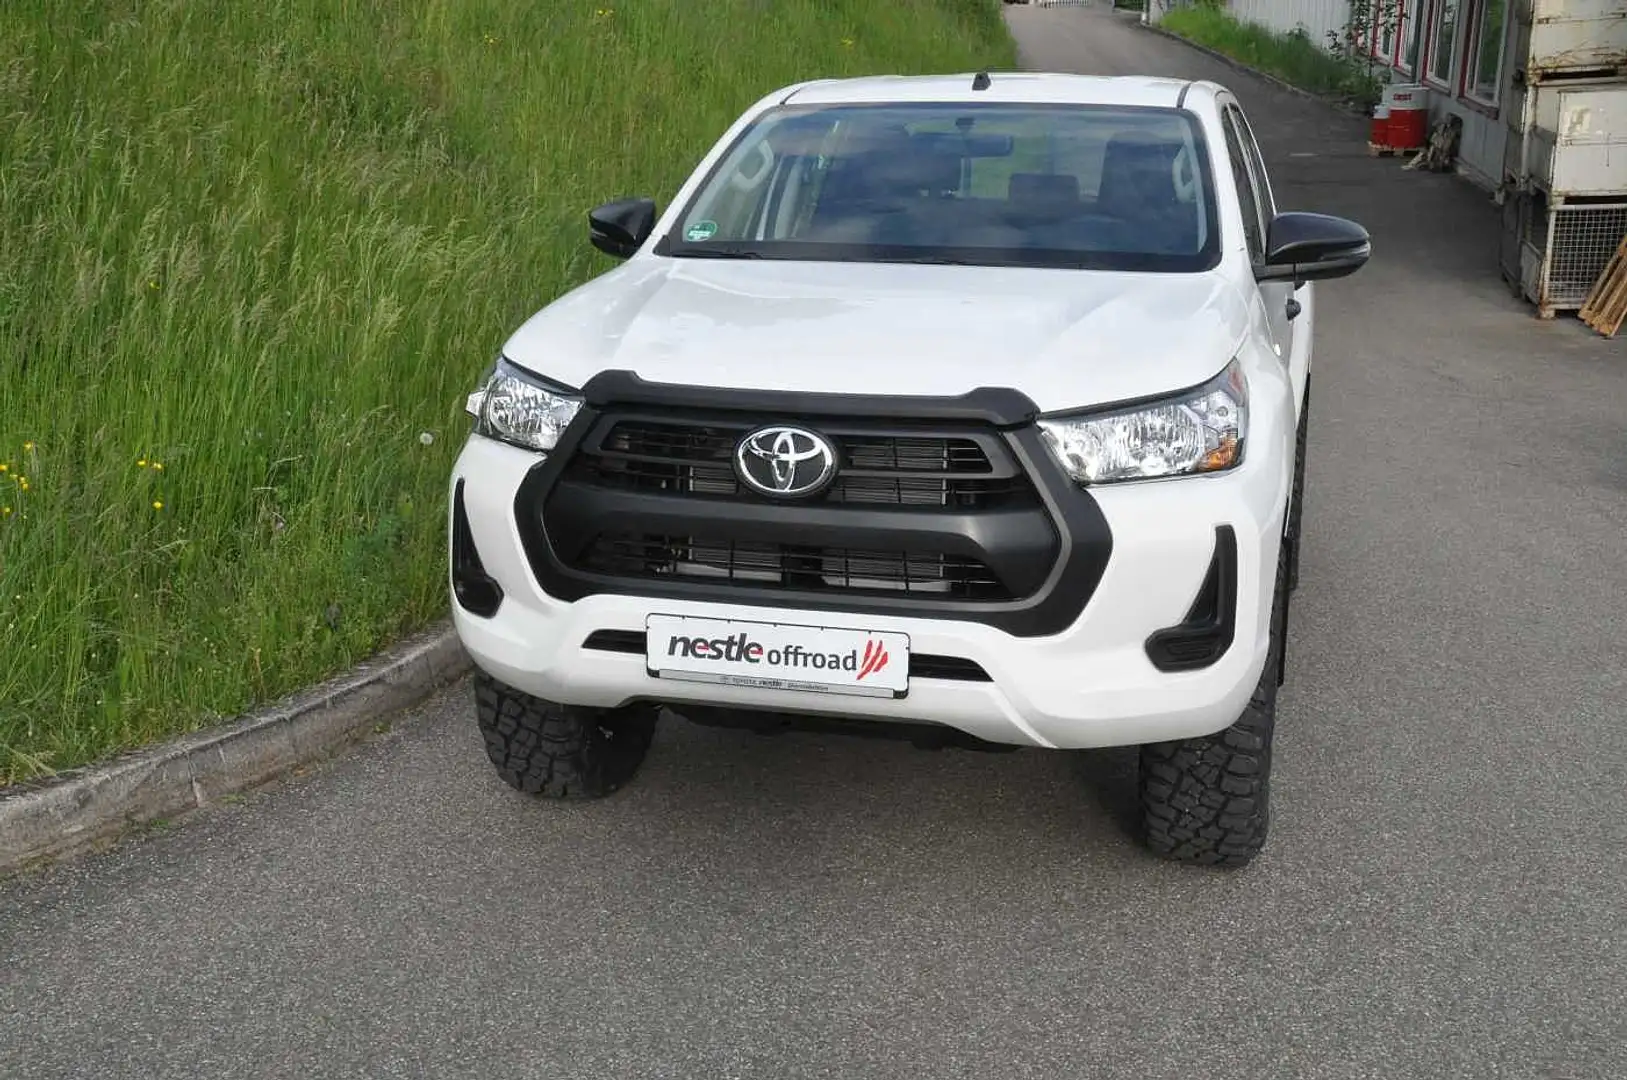 Toyota Hilux 2.4 4x4 Double Cab Duty NESTLE OFFROAD Weiß - 2